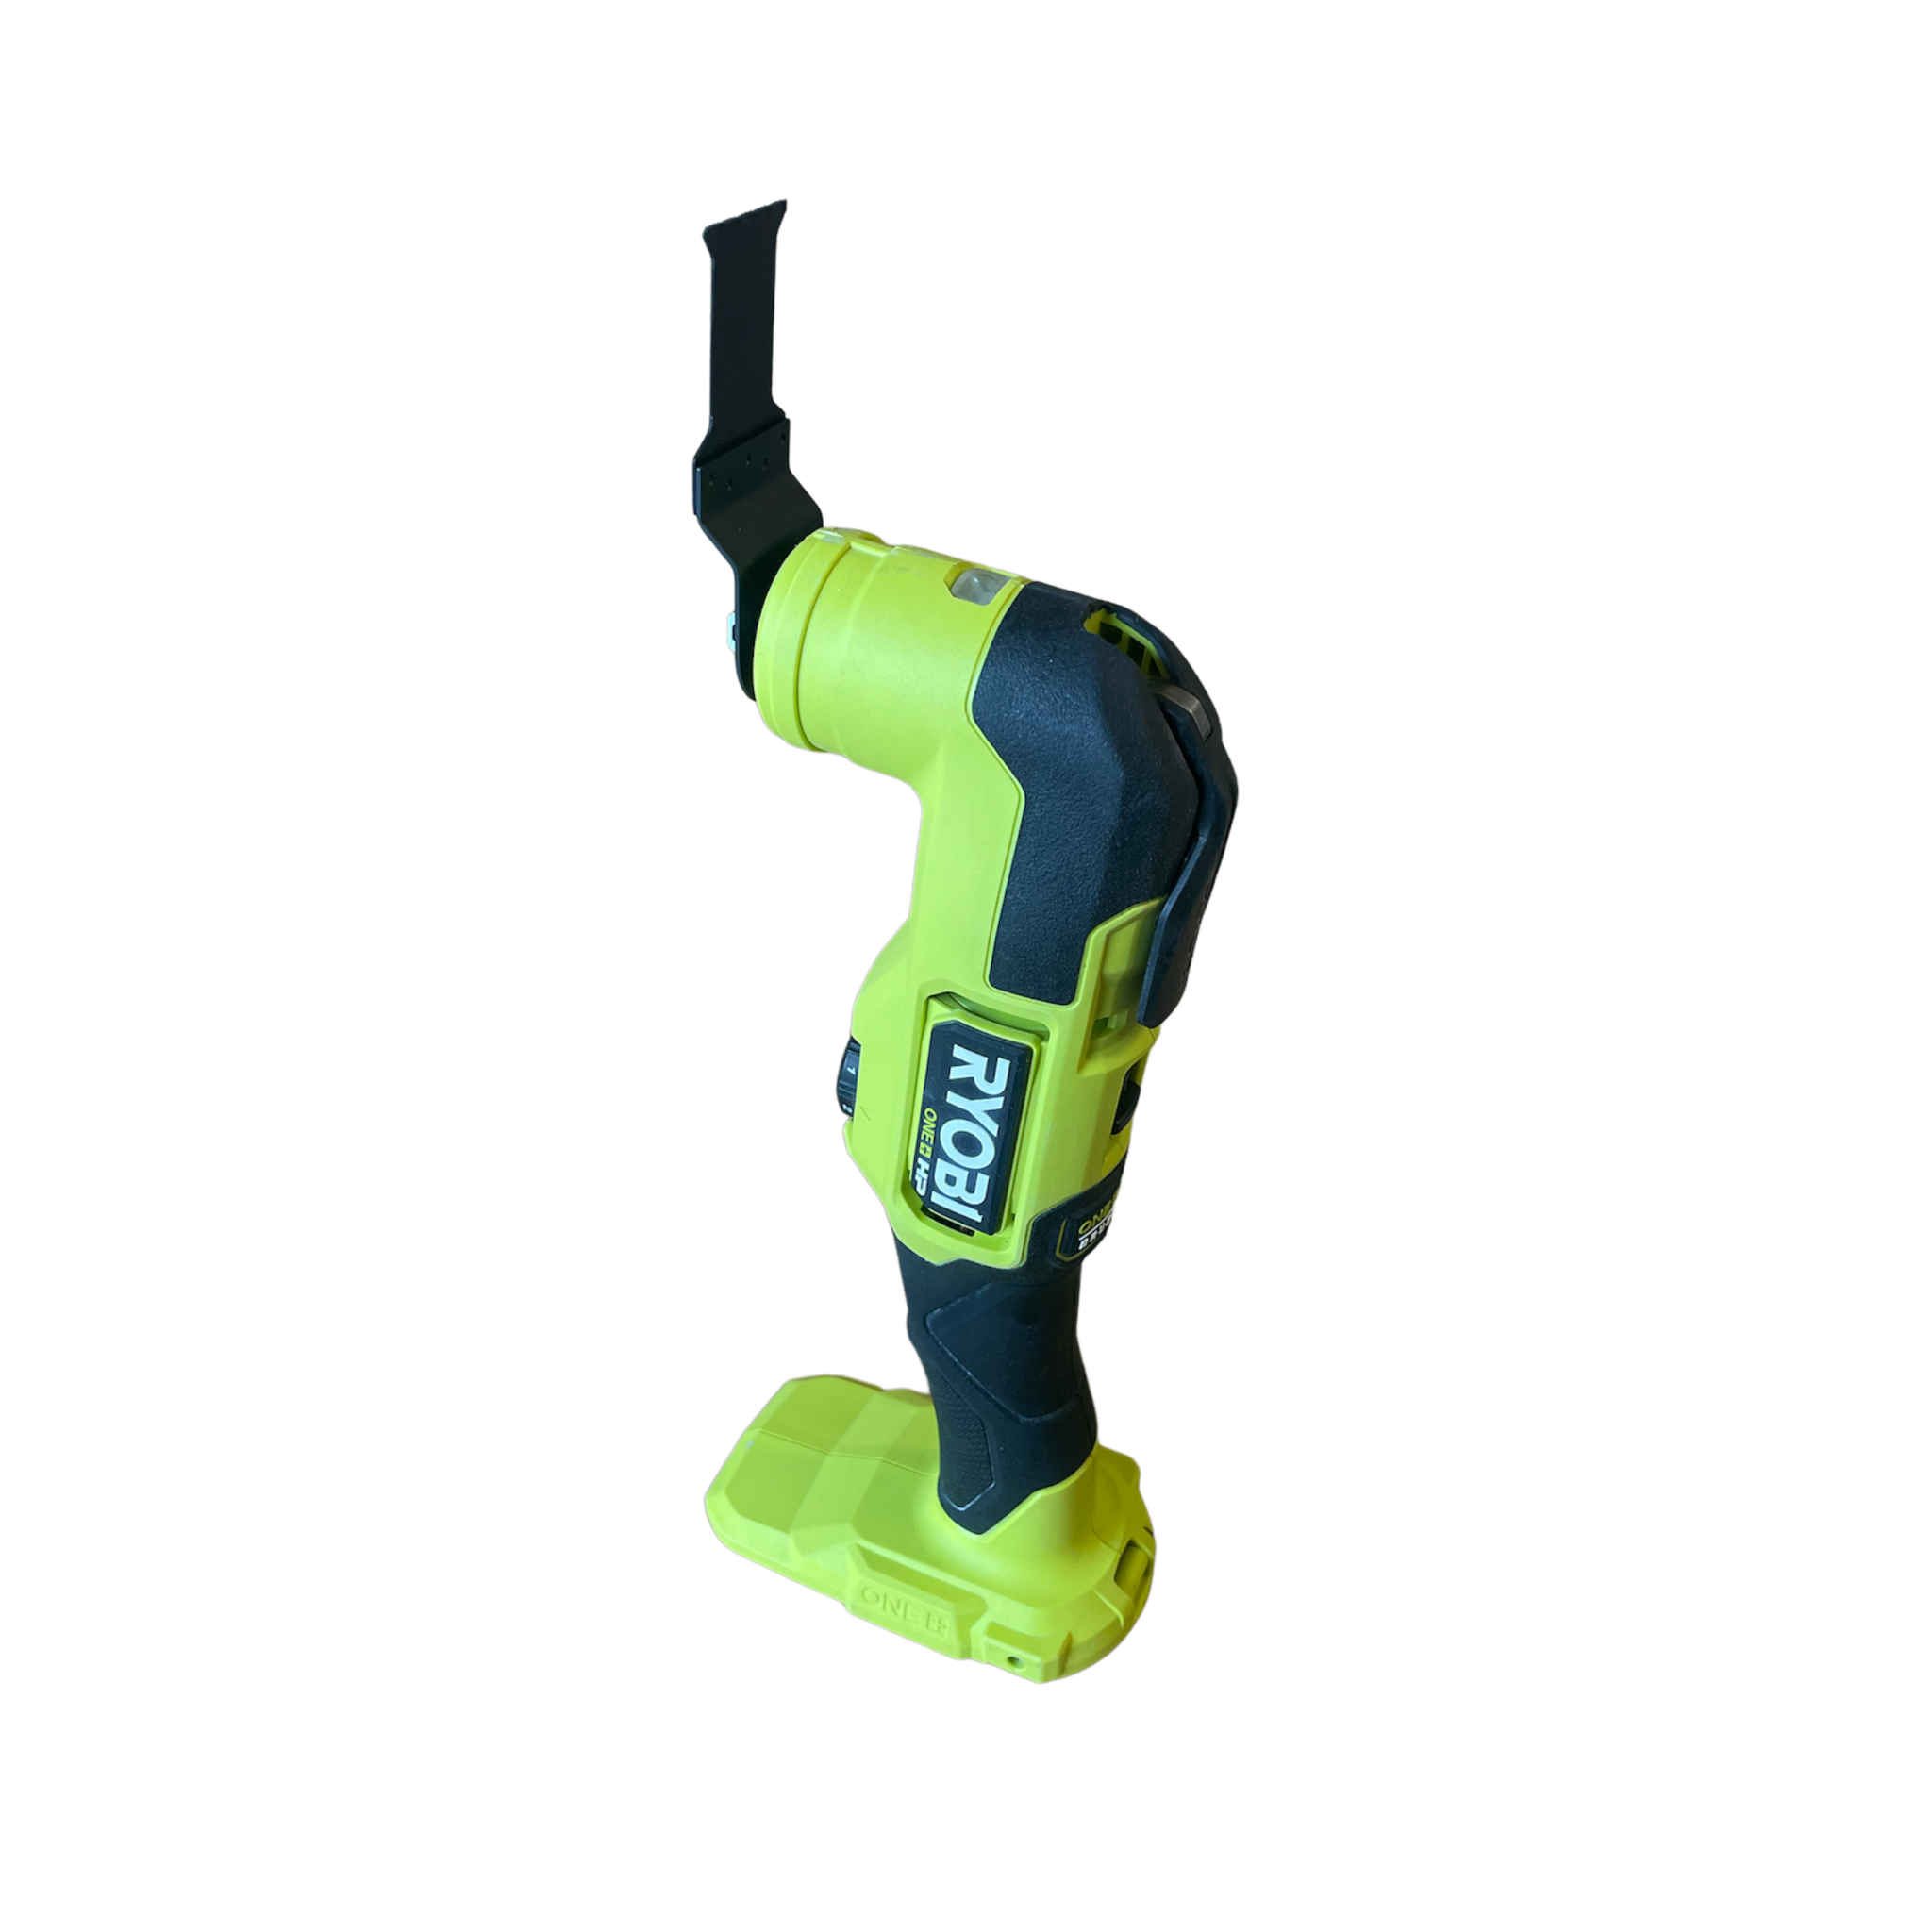 ONE+ 18-Volt Brushless Cordless (Tool Only) – Ryobi Finders